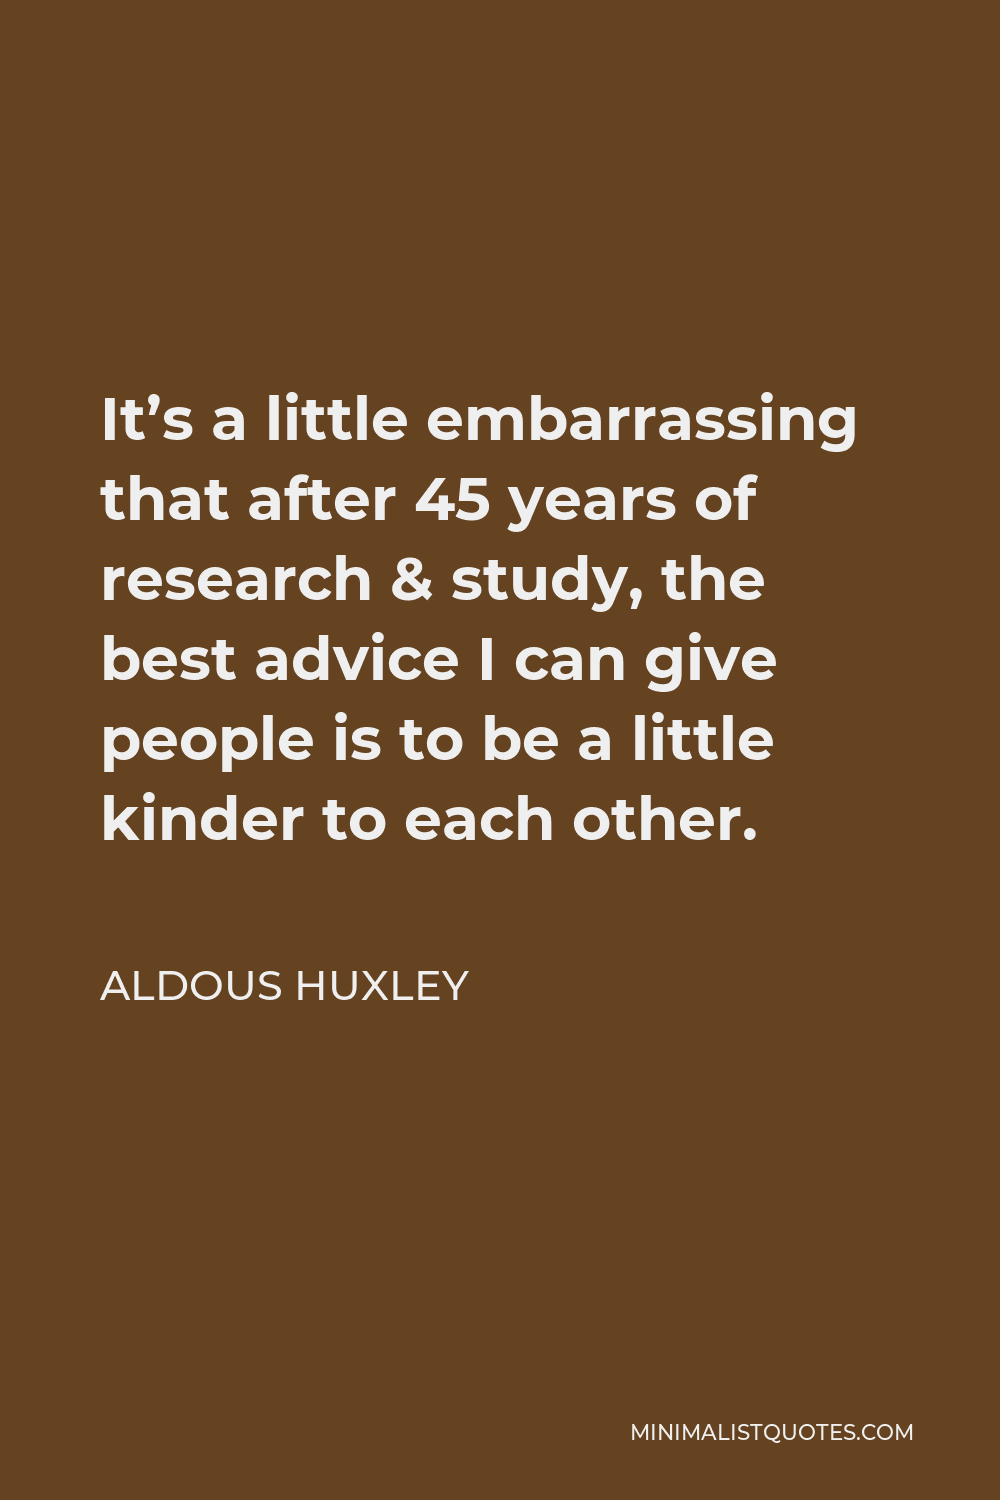 Aldous Huxley Quote - It’s a little embarrassing that after 45 years of research & study, the best advice I can give people is to be a little kinder to each other.